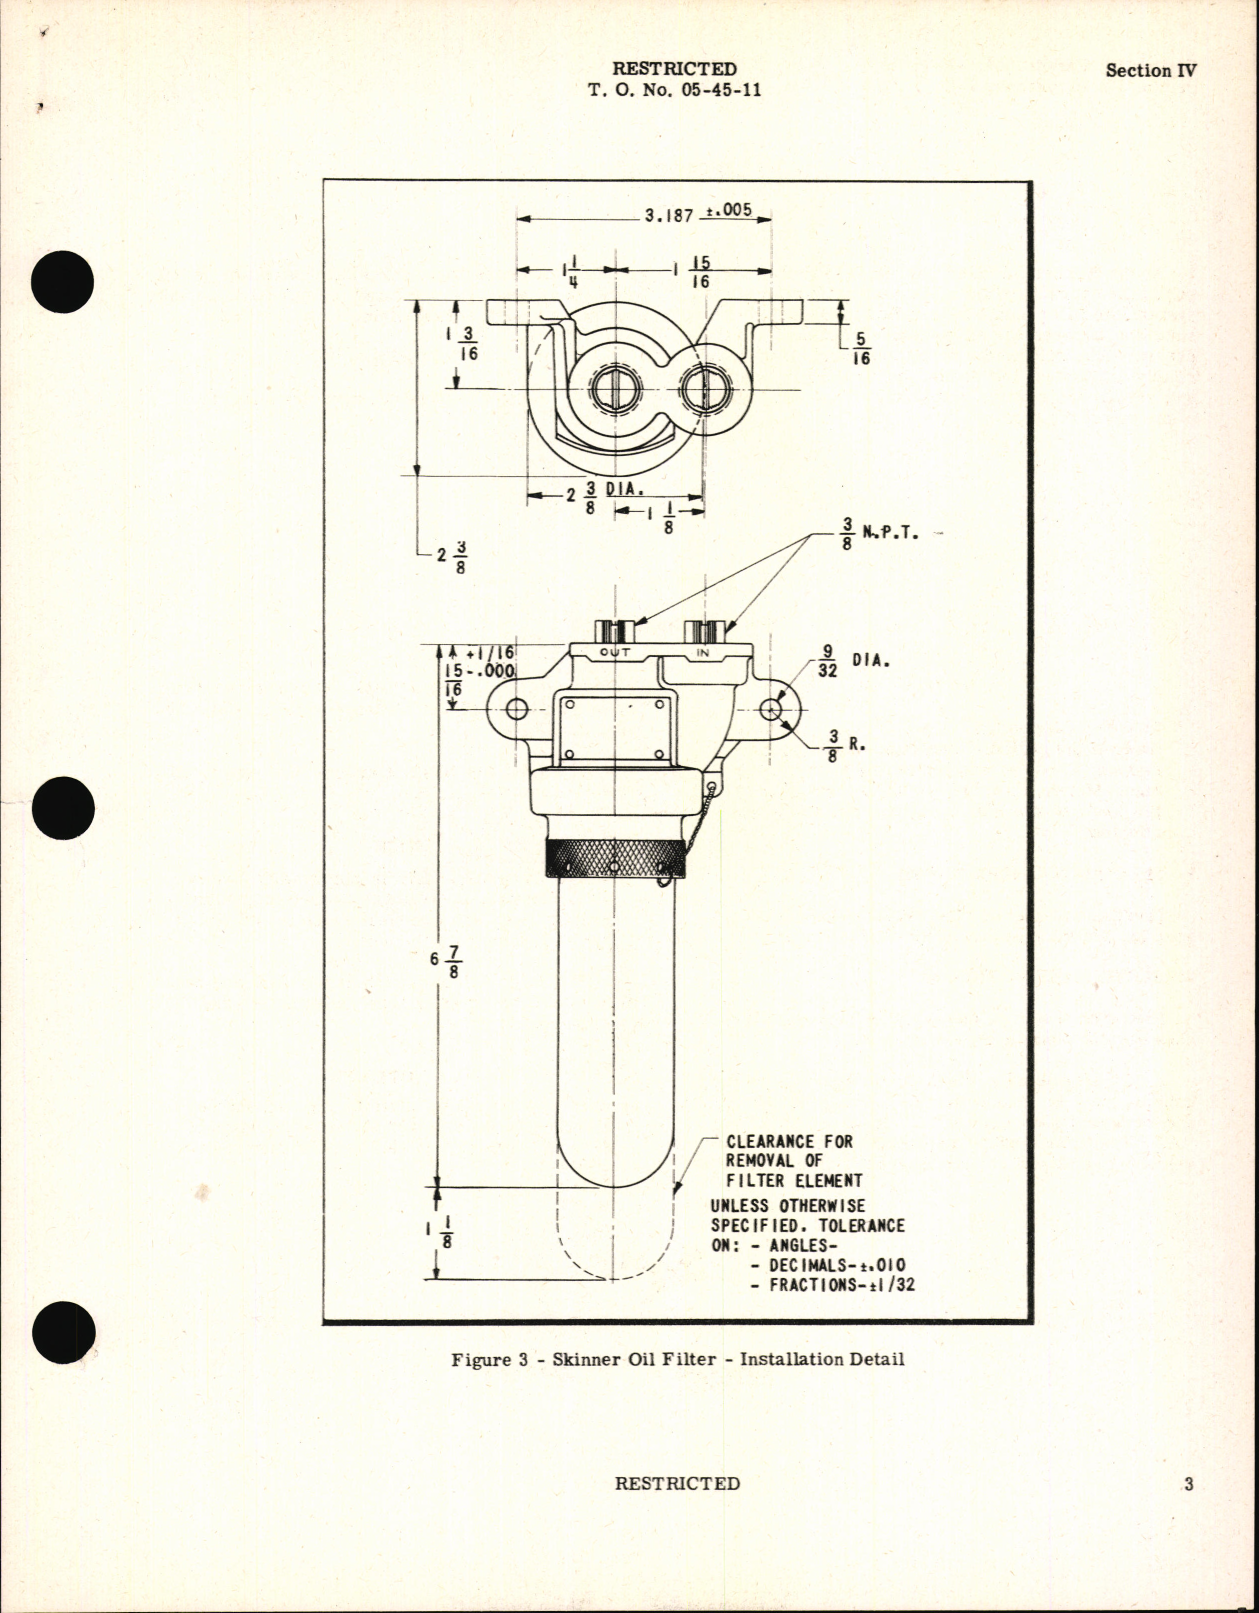 Sample page 7 from AirCorps Library document: Handbook of Instructions with Parts Catalog for Oil Filters for Aircraft Automatic Pilots